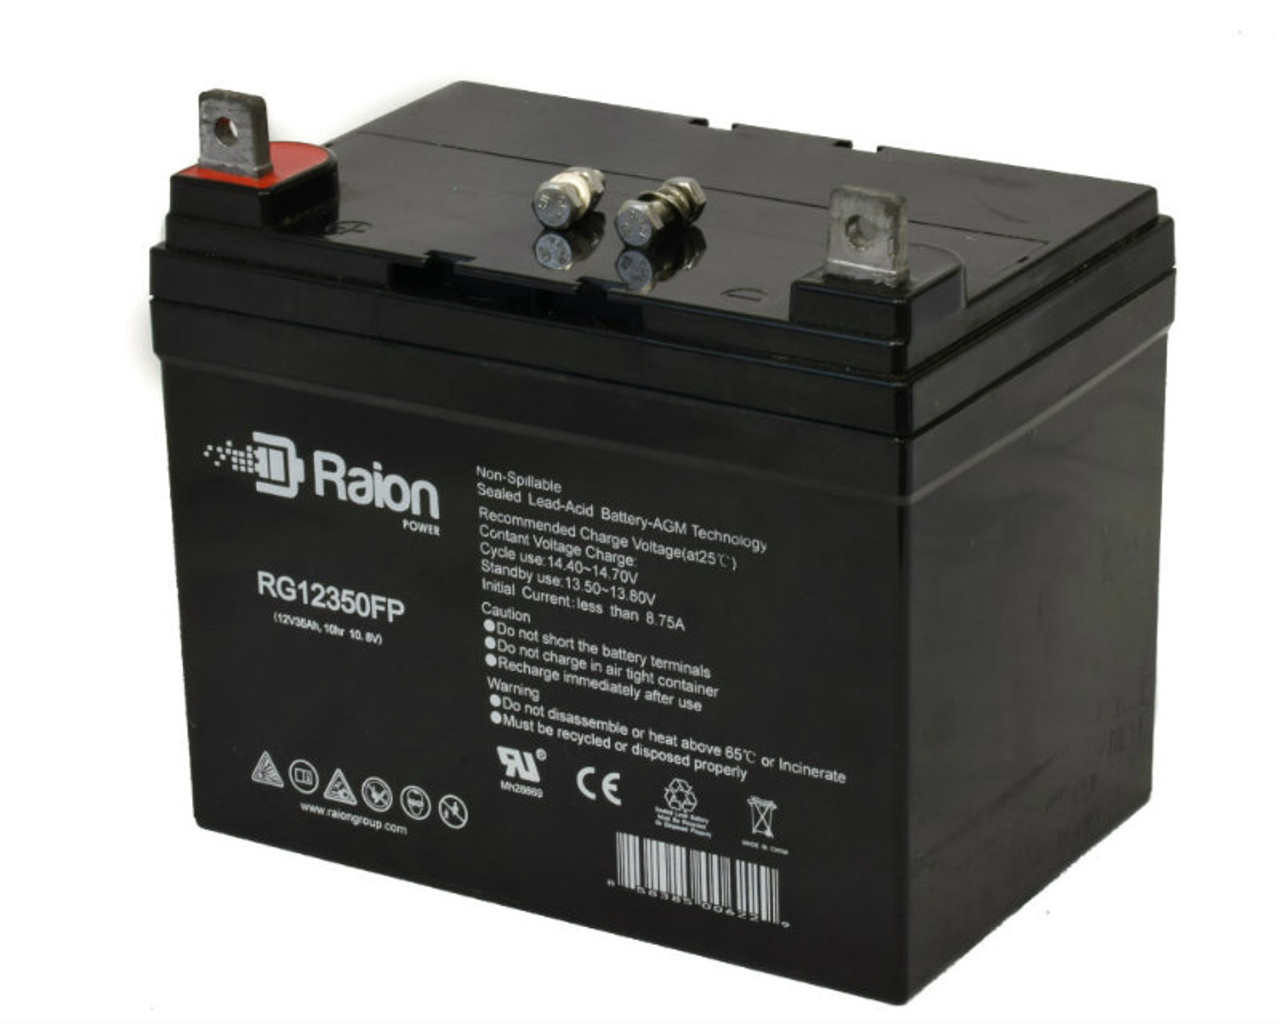 Raion Power Replacement 12V 35Ah RG12350FP Battery for J.I. Case & Case IH 222